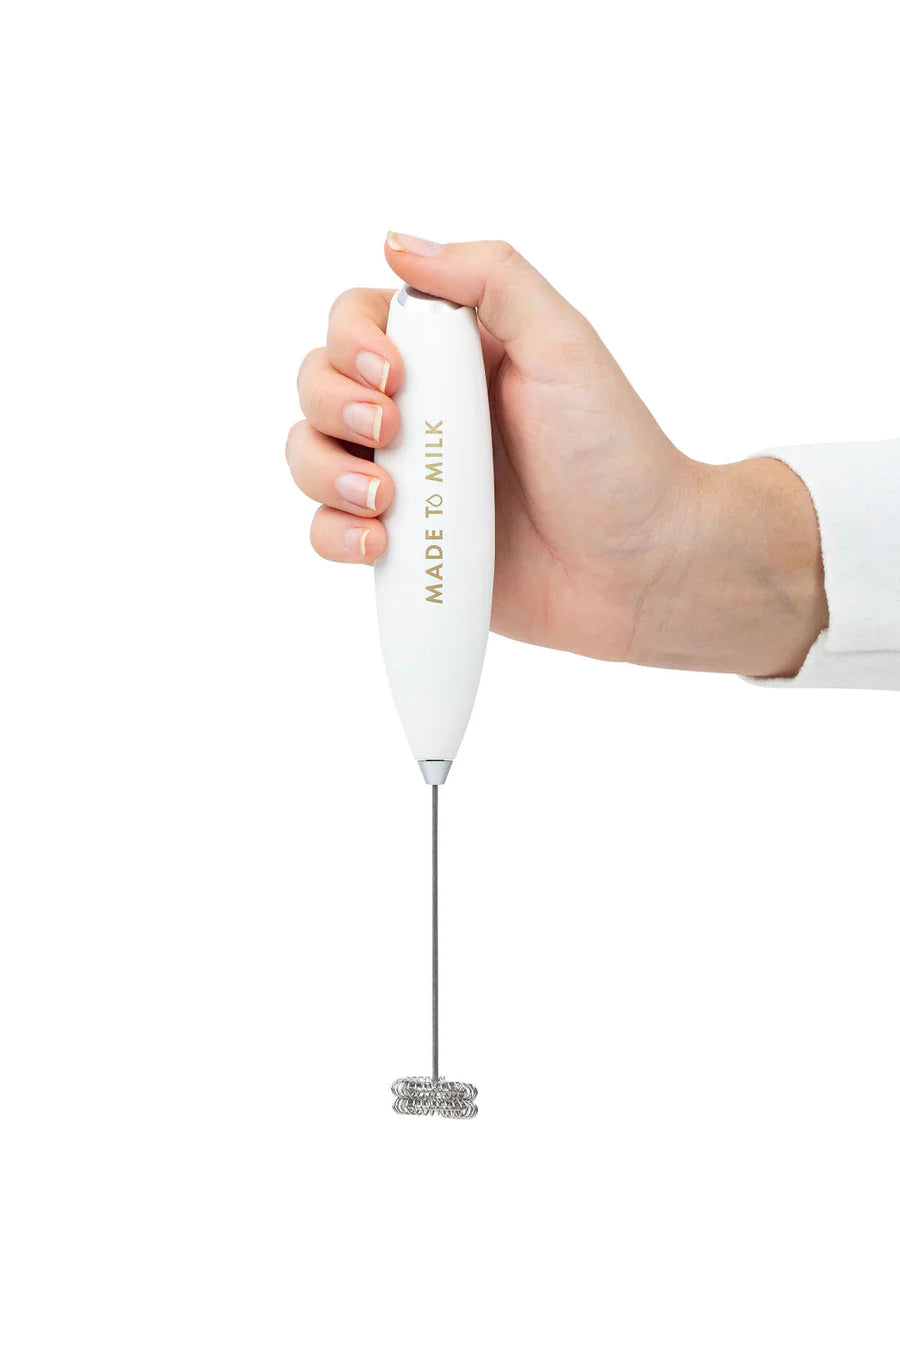 Handheld Milk Frother + Whisk